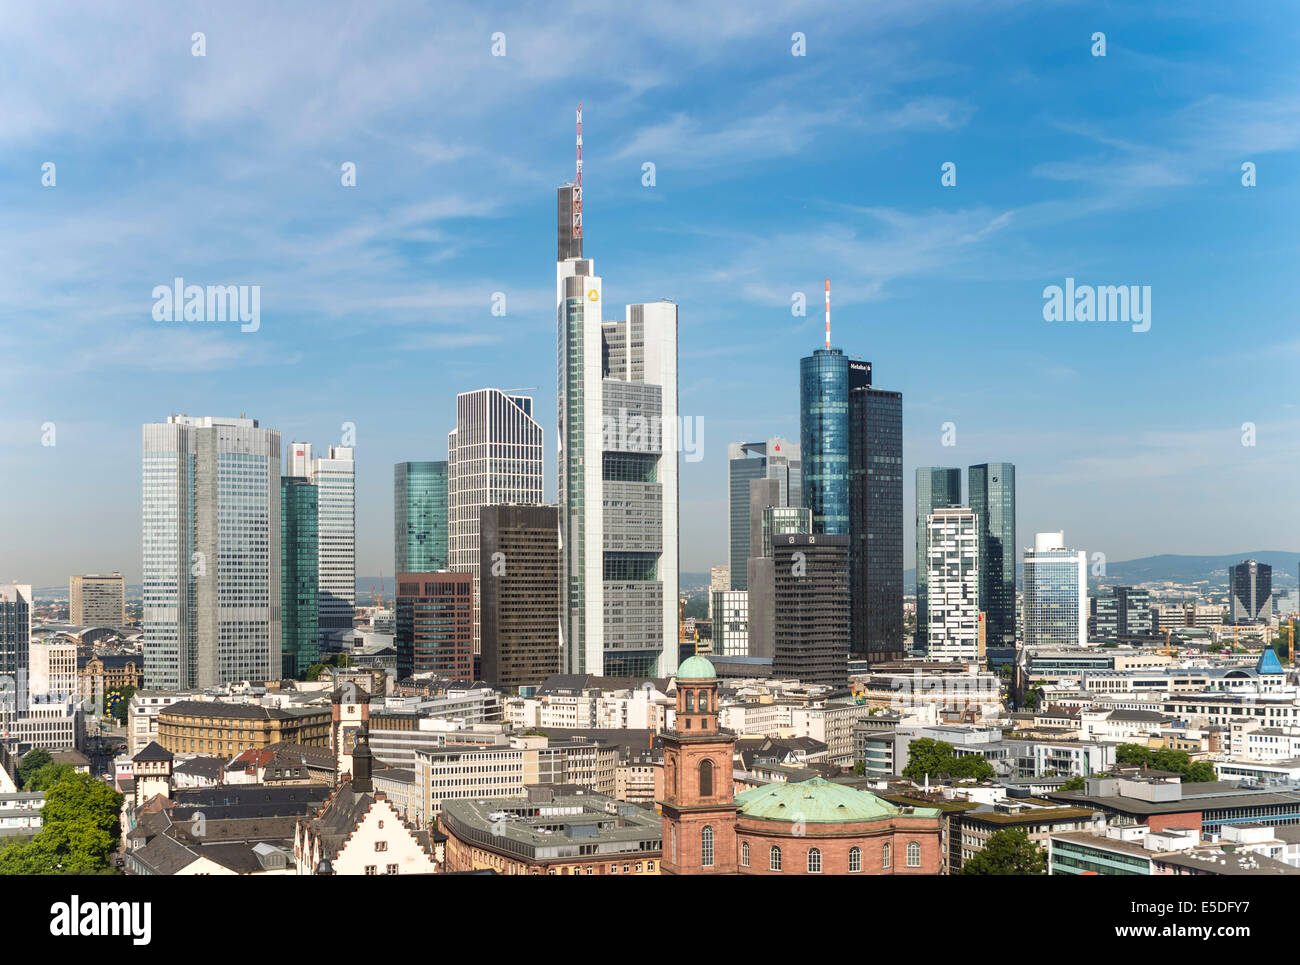 Skyline, view from the cathedral, with Trianon, Commerzbank Tower, Main Tower, TaunusTurm, Silberturm tower, Deutsche Bank I and Stock Photo